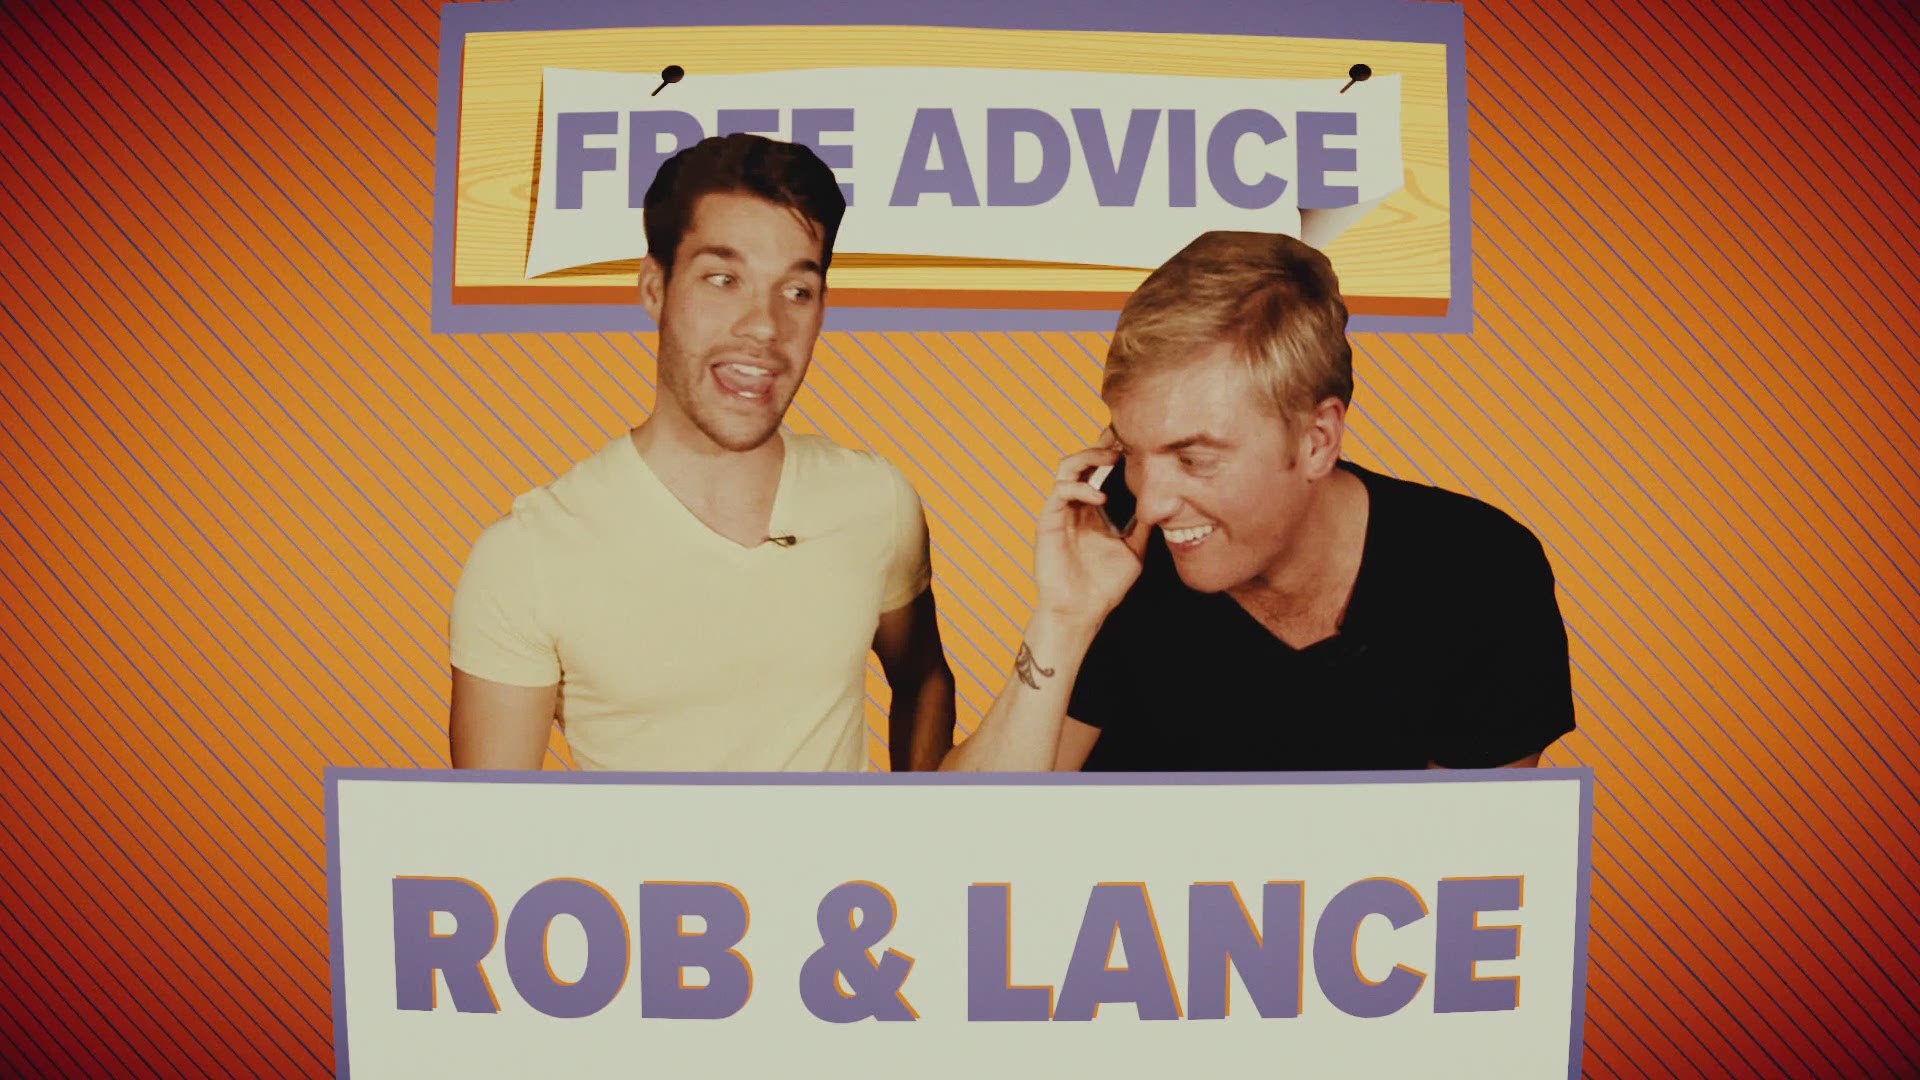 Rob and Lance give some advice on how to celebrate the day of love and how not to.